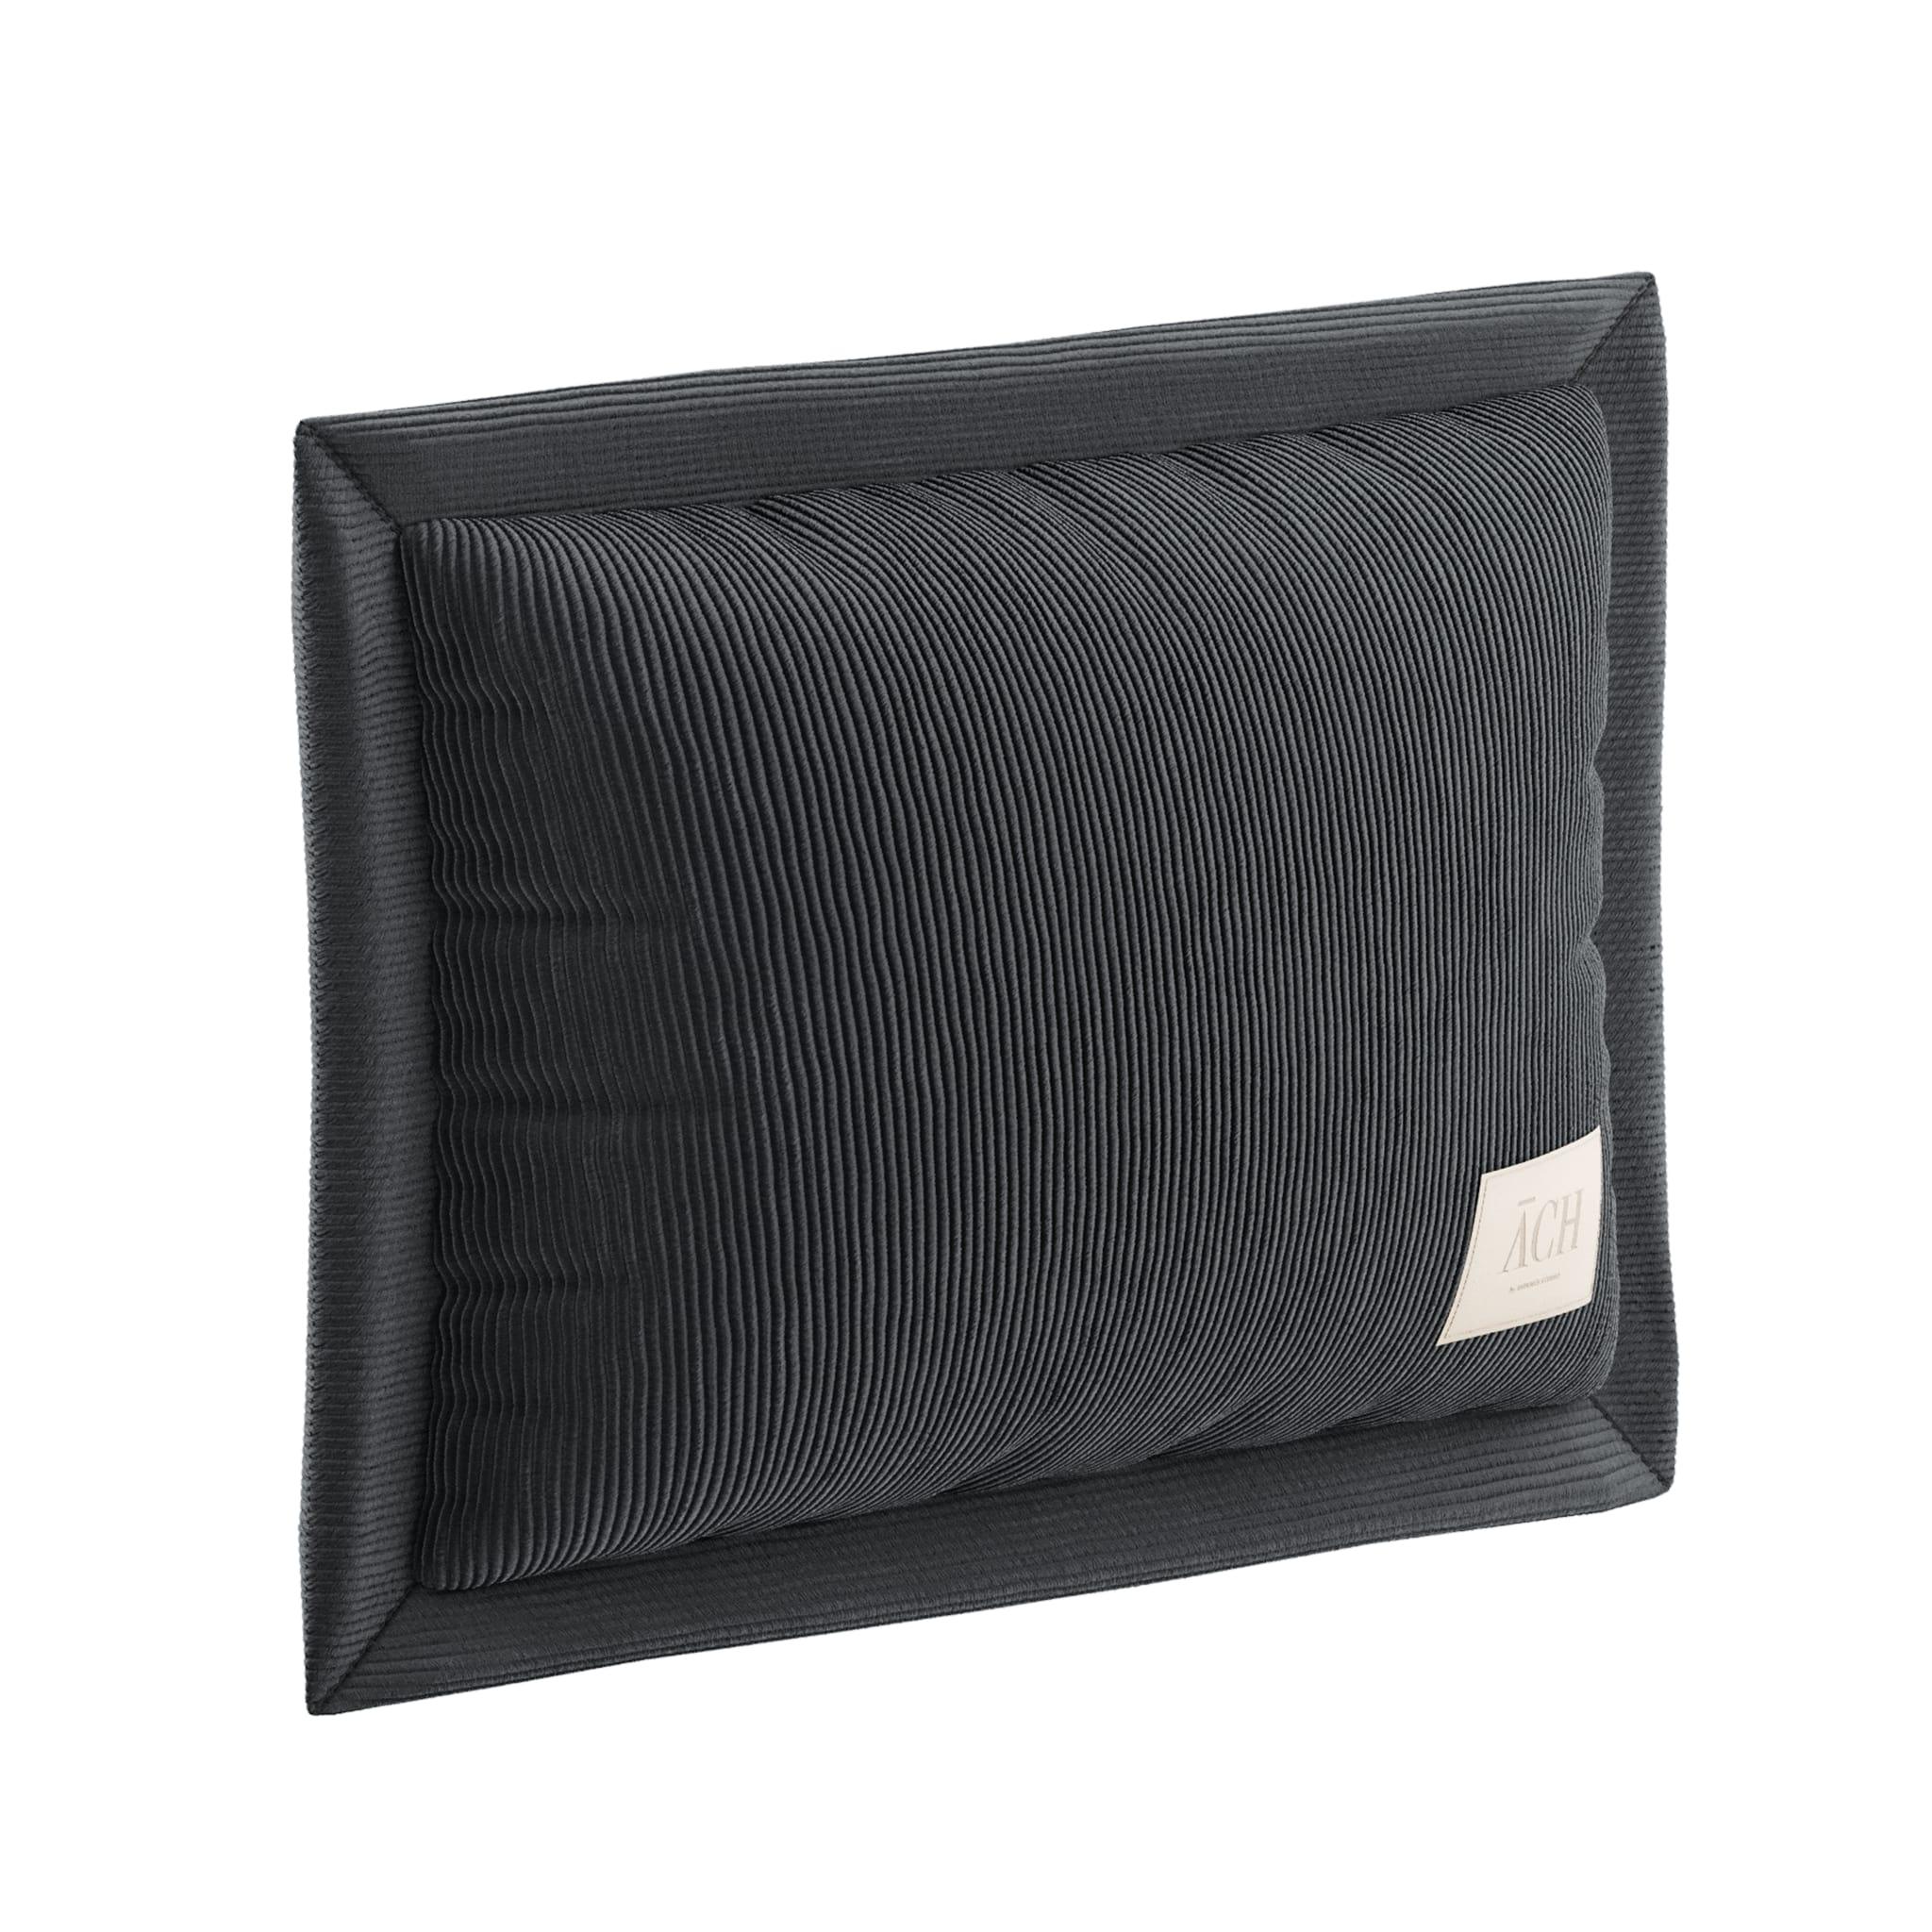 Black Corduroy Decorative Throw Pillow, Modern Lumbar Cushion in Ribbed Velvet
Black is a rectangle flange pillow in plush corduroy with a volcanic sand black color. 
The refined corduroy fabric of this decorative flange pillow is tailored in a